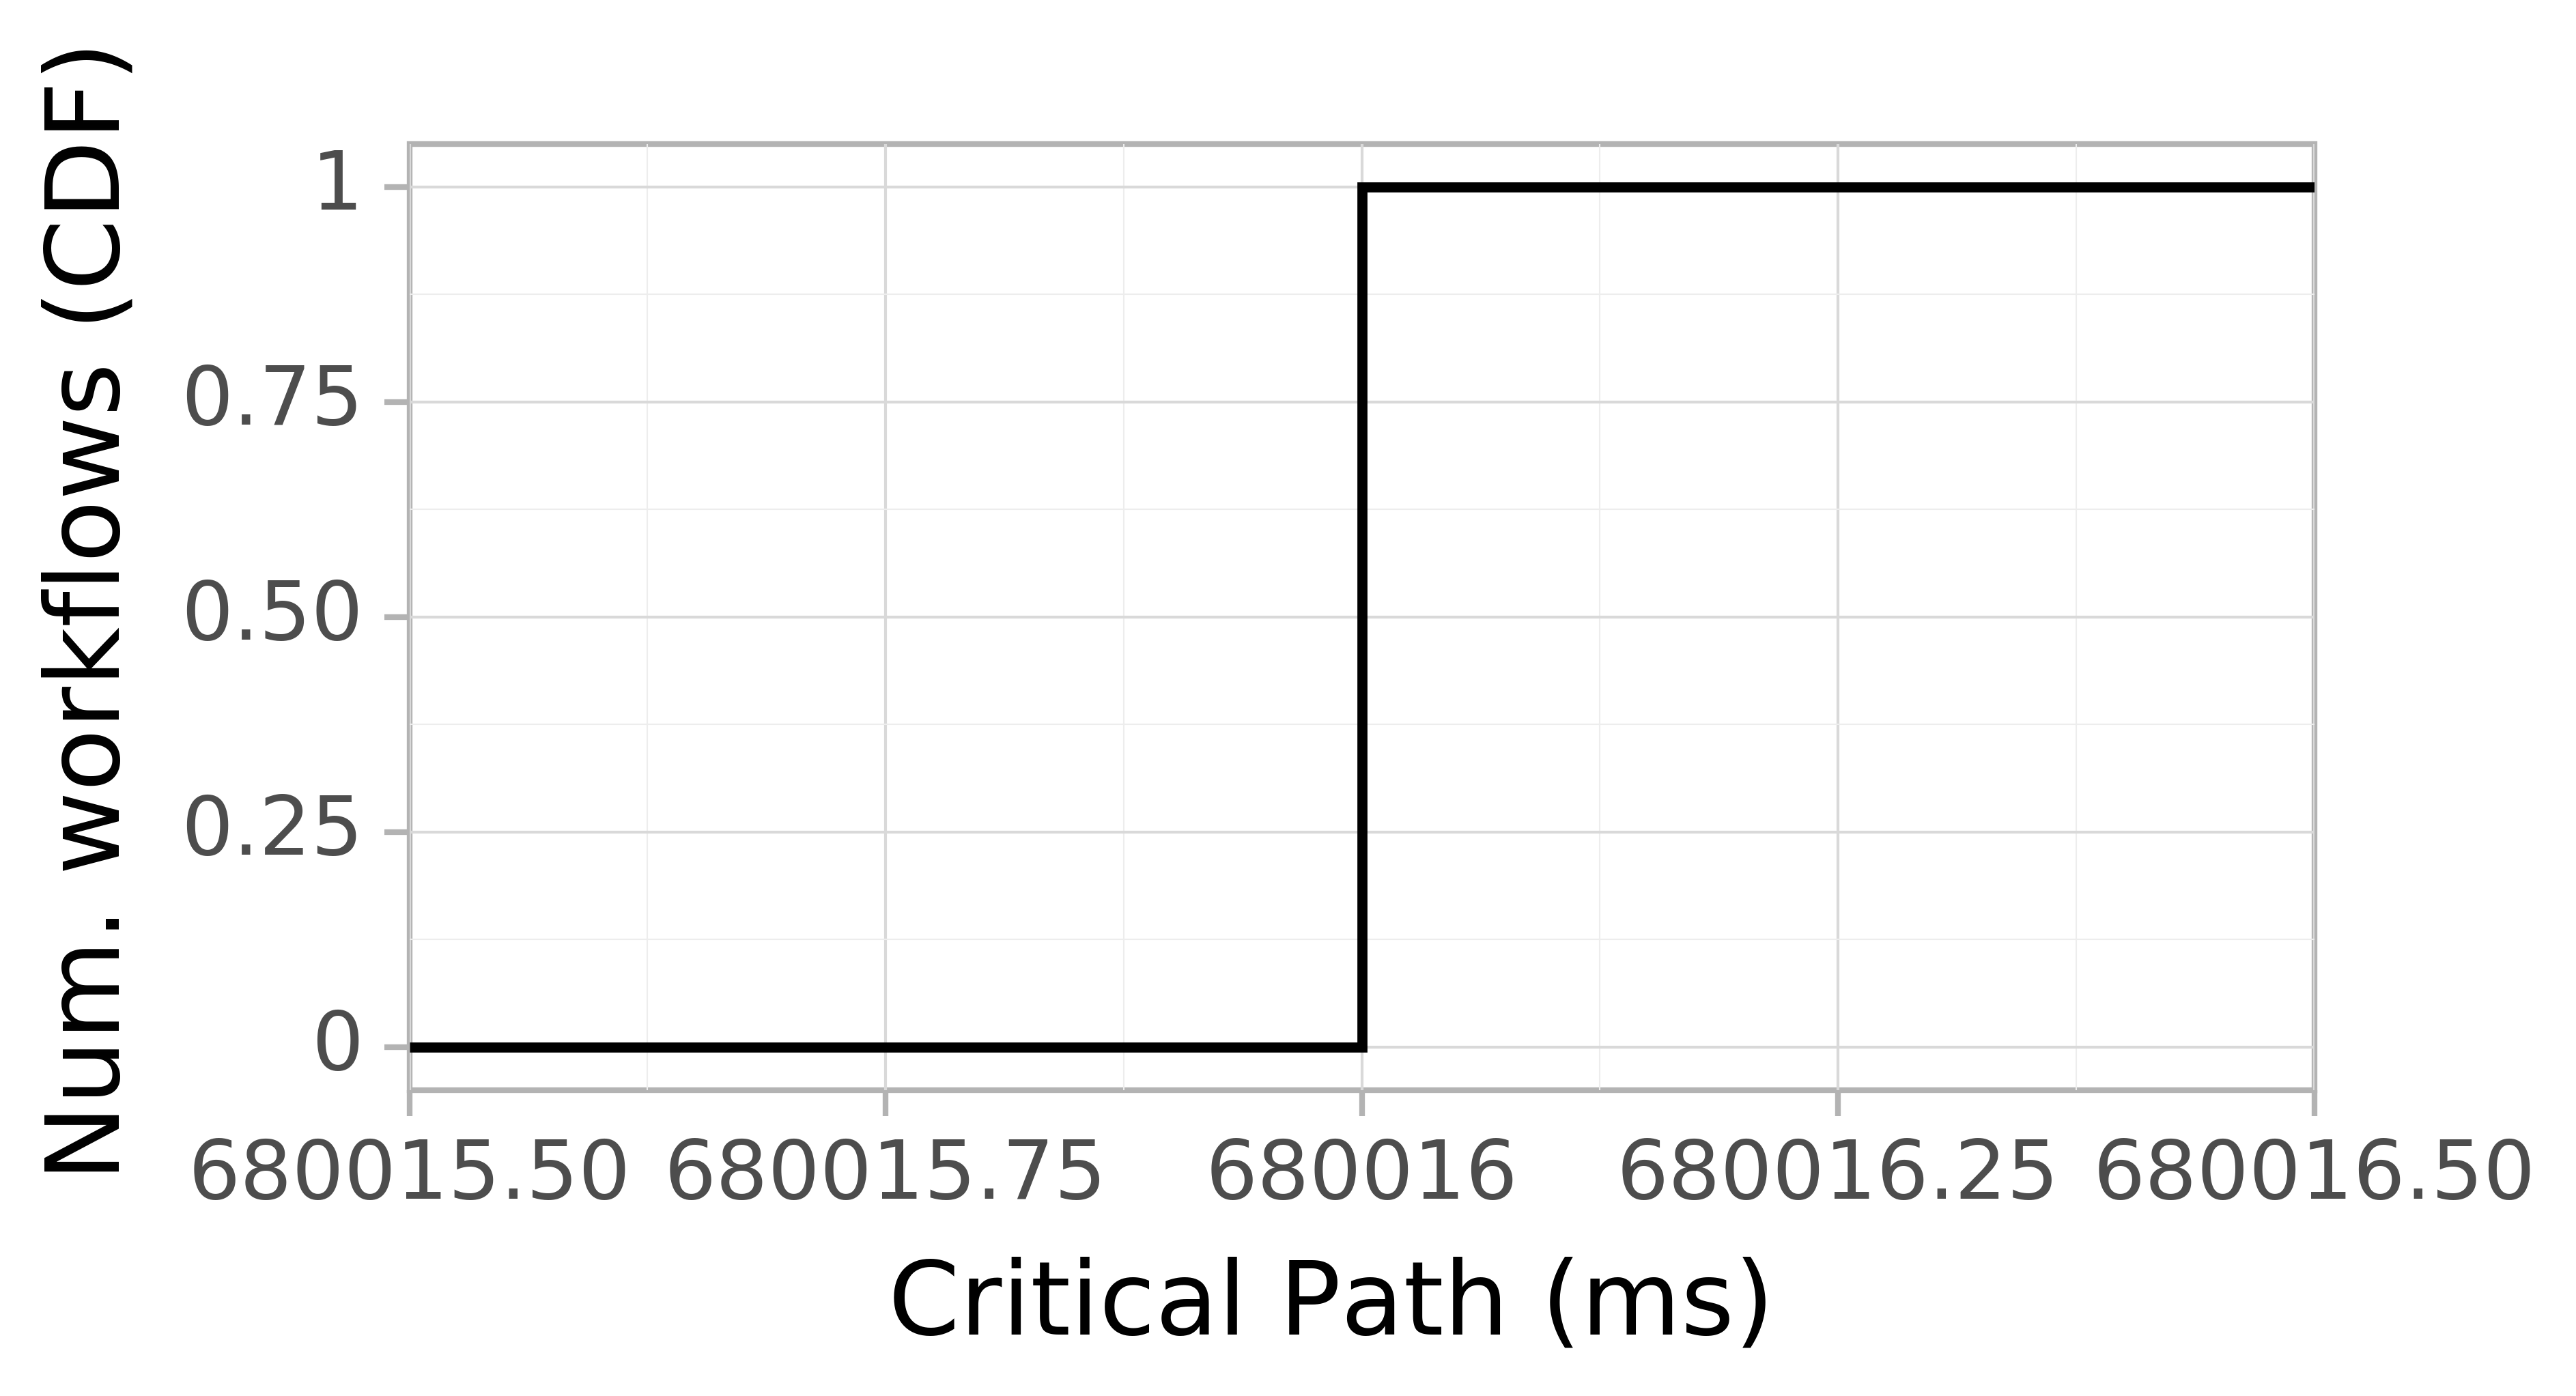 Job runtime CDF graph for the Pegasus_P6a trace.